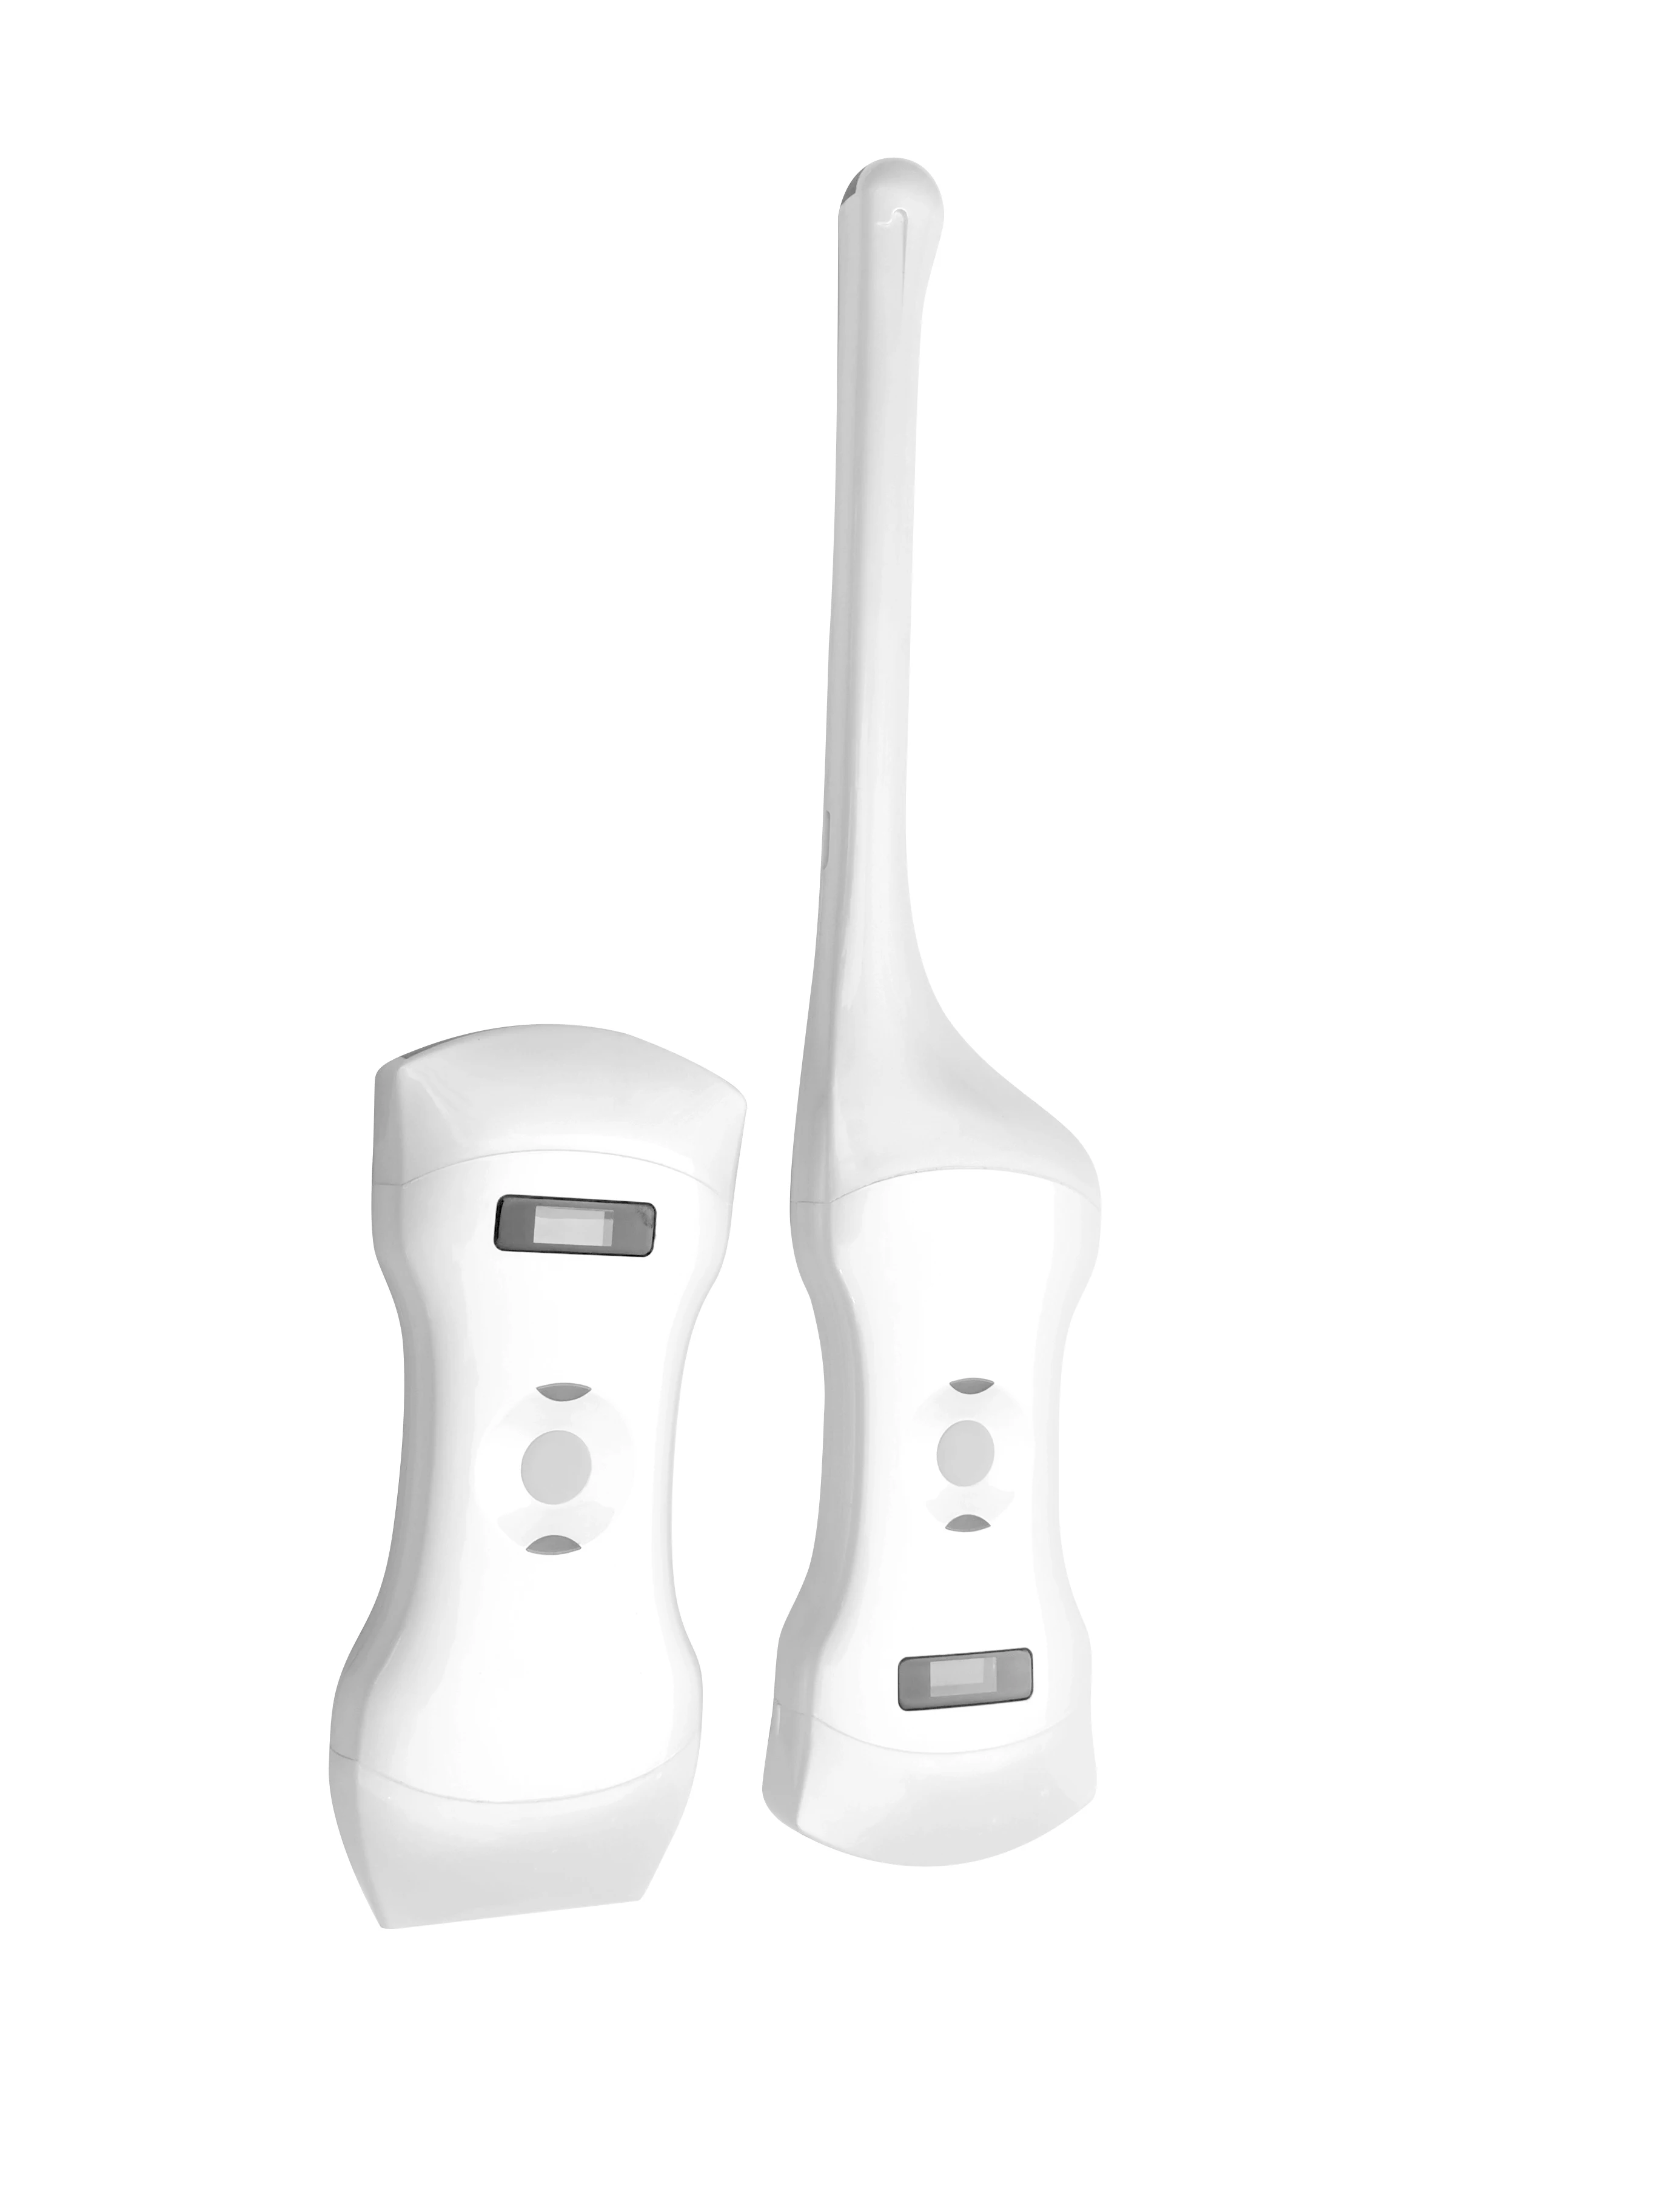 

Handheld Potable Phased Array Cardiac, Linear, Transvaginal & Convex 3 in 1 Color Doppler Ultrasound Scanner